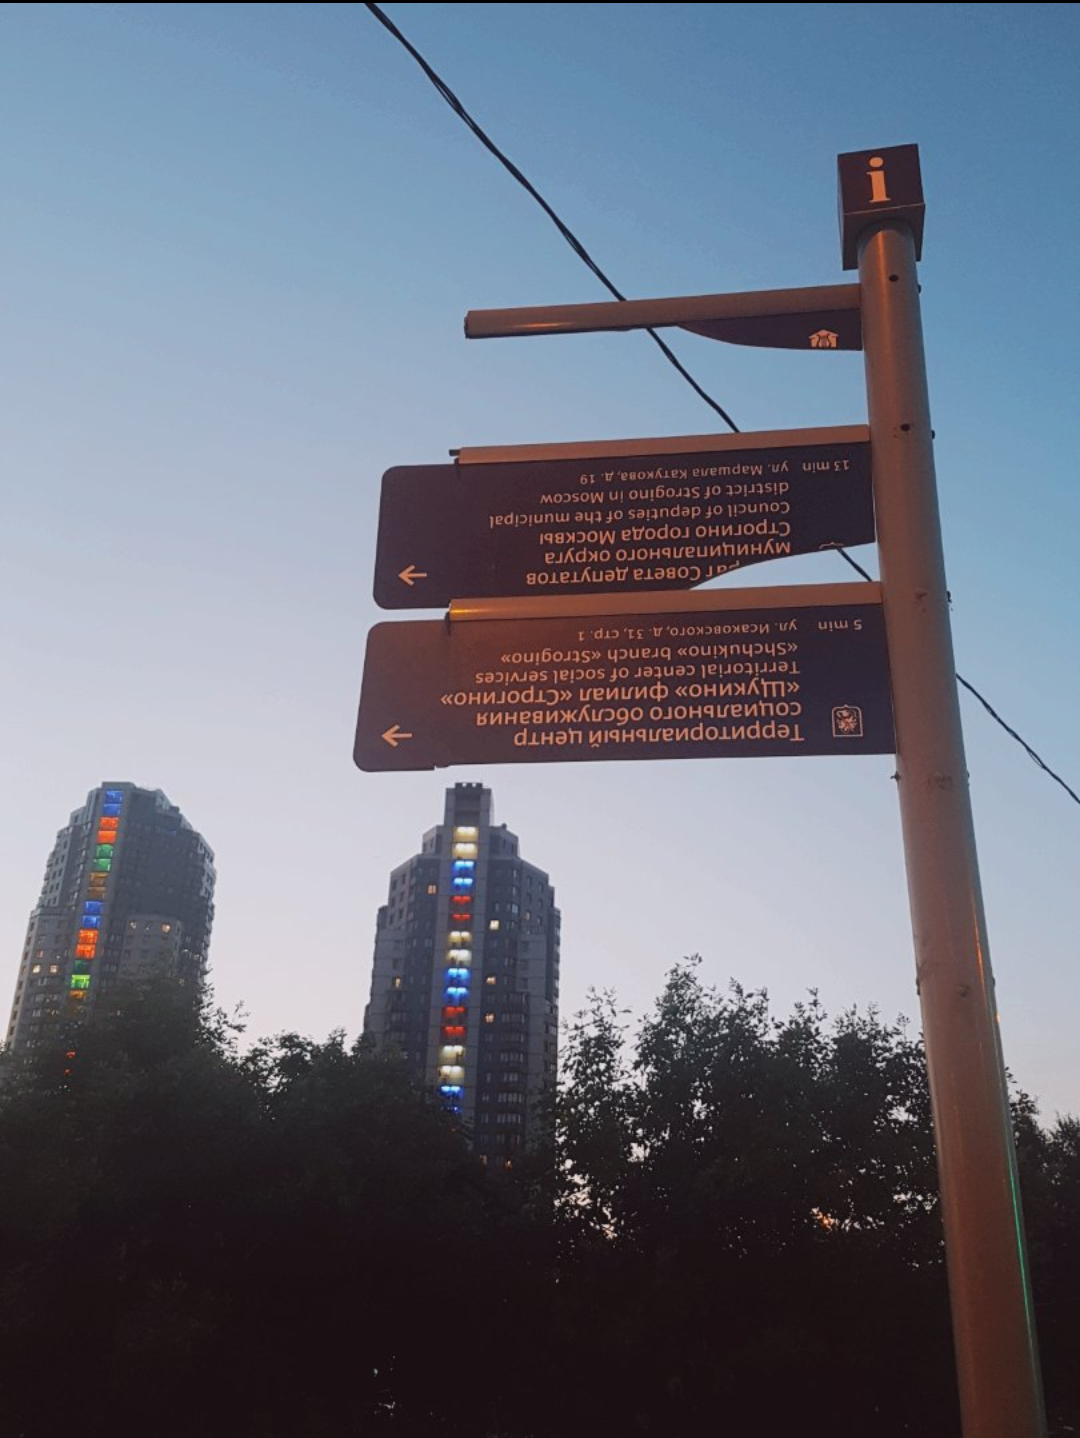 Signposts for Australian fans have been installed in Moscow. - 2018 FIFA World Cup, Australia, Hospitality